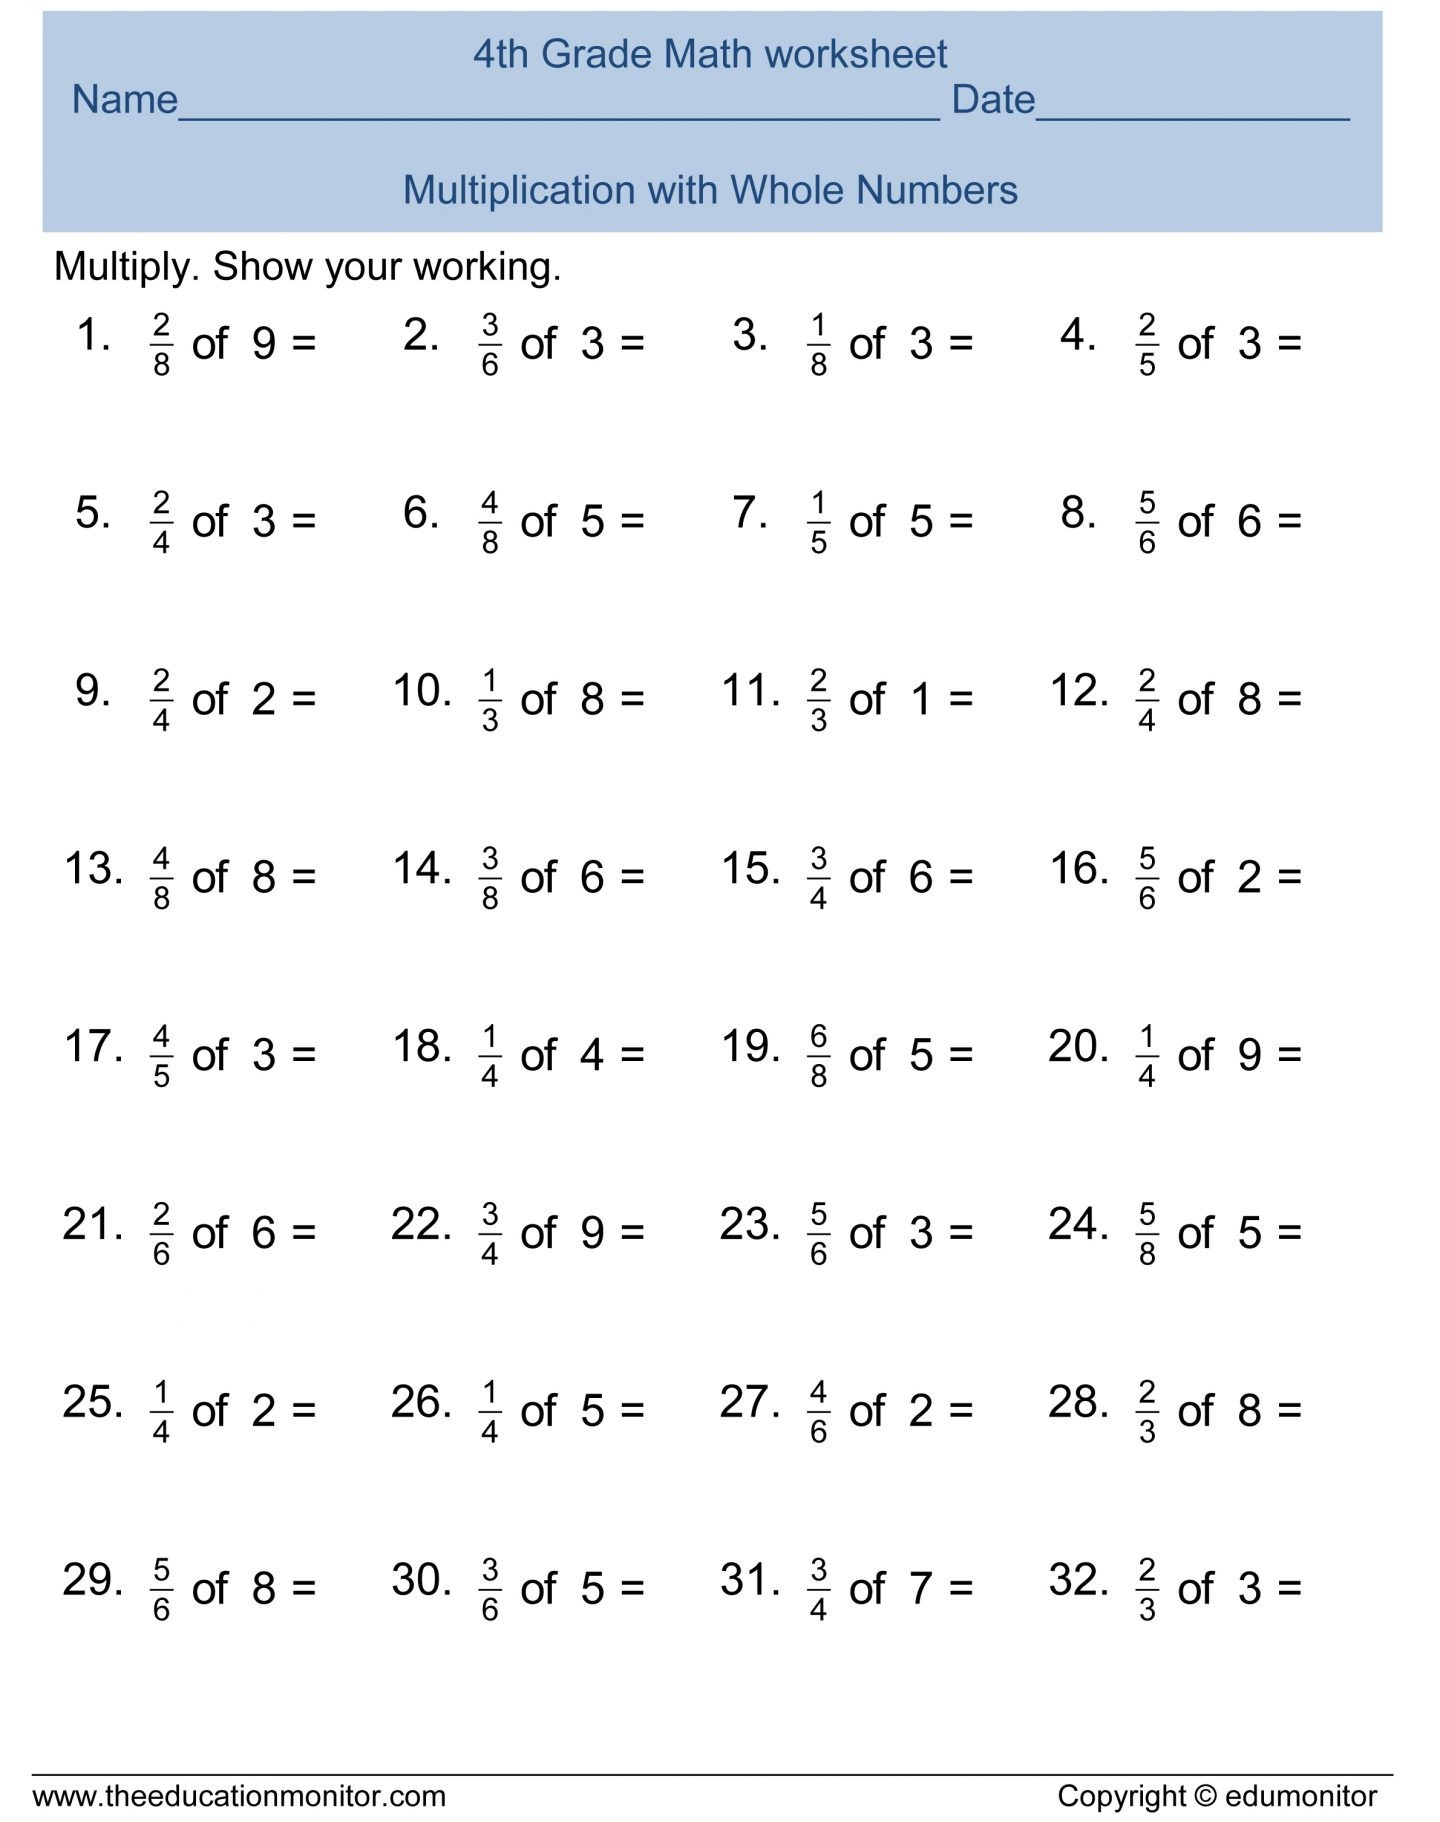 7Th Grade Math Worksheets Free Printable With Answers Stunning - 7Th | 7Th Grade Math Worksheets Printable With Answers